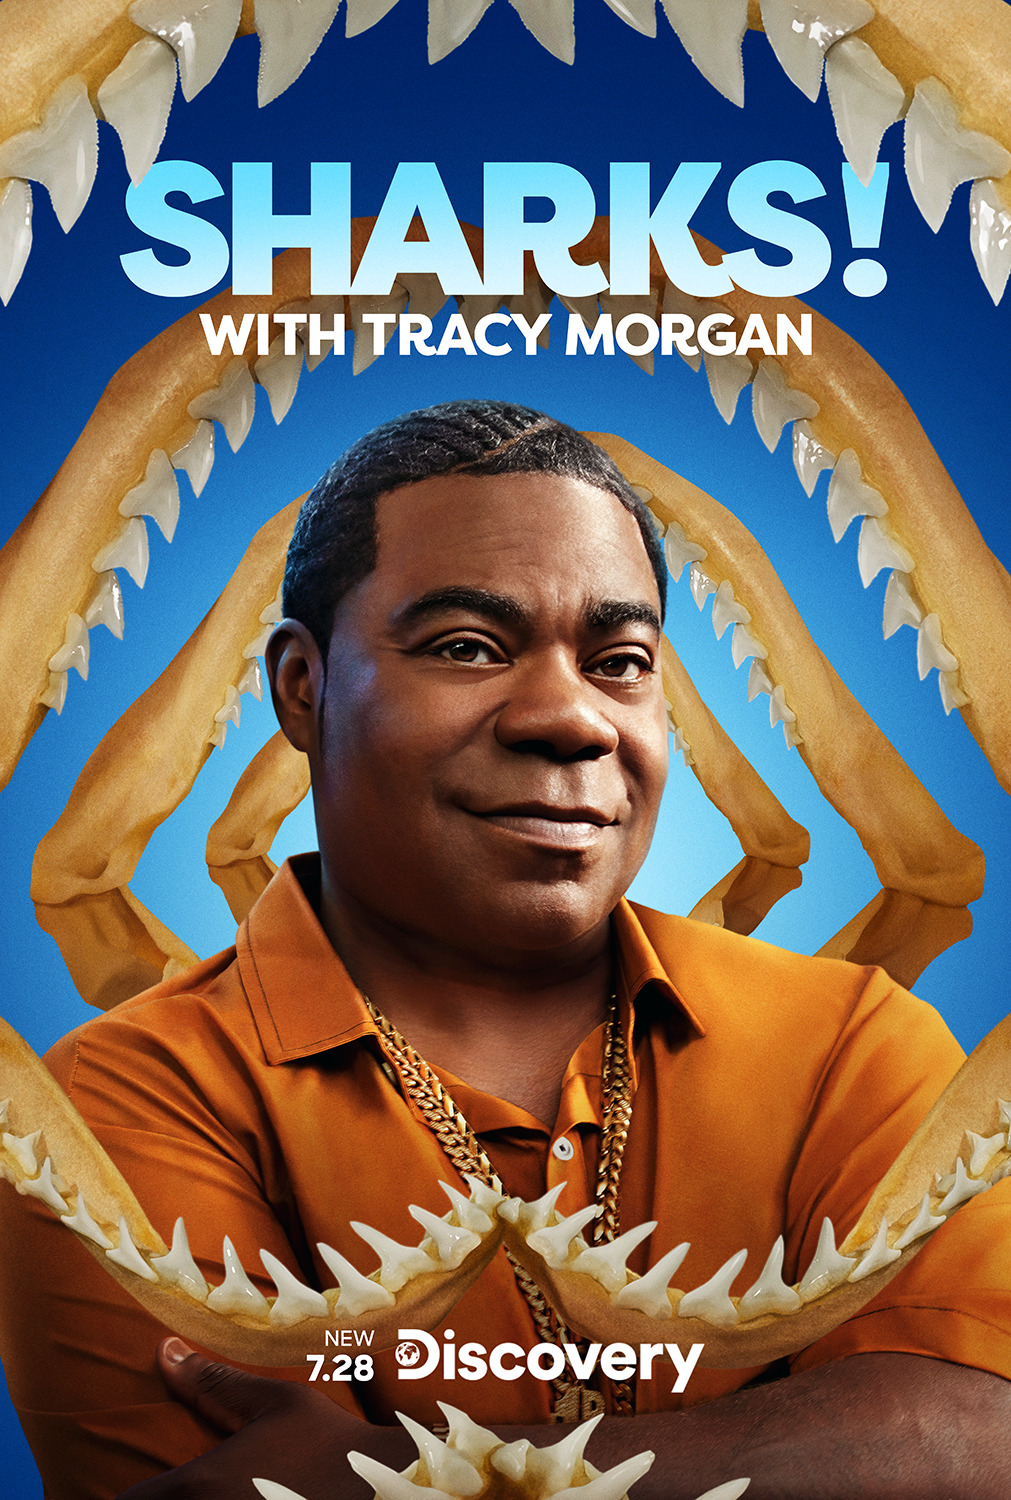 Extra Large TV Poster Image for Sharks! with Tracy Morgan 